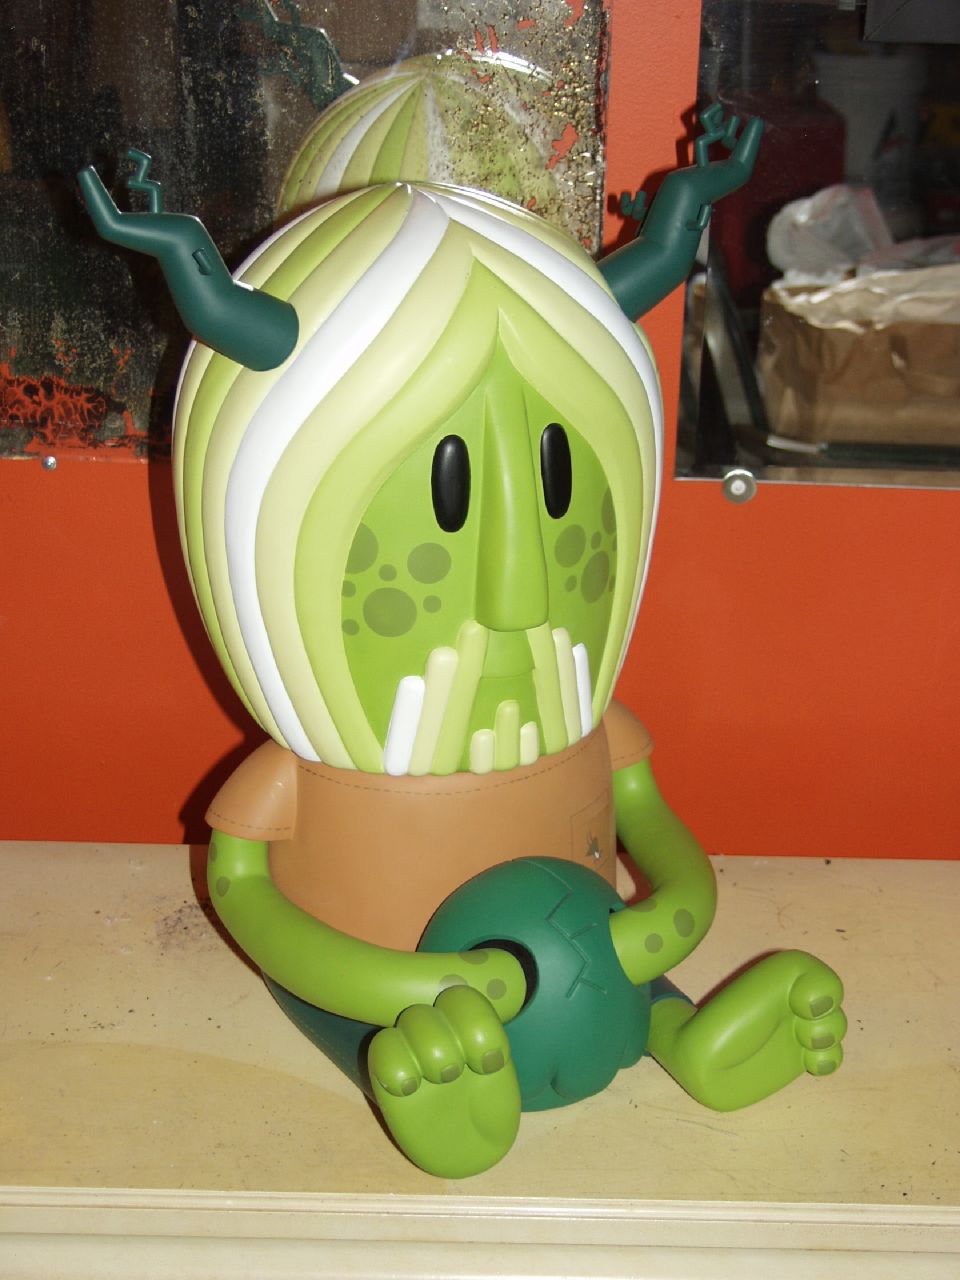 a close up of a toy in the shape of an onion